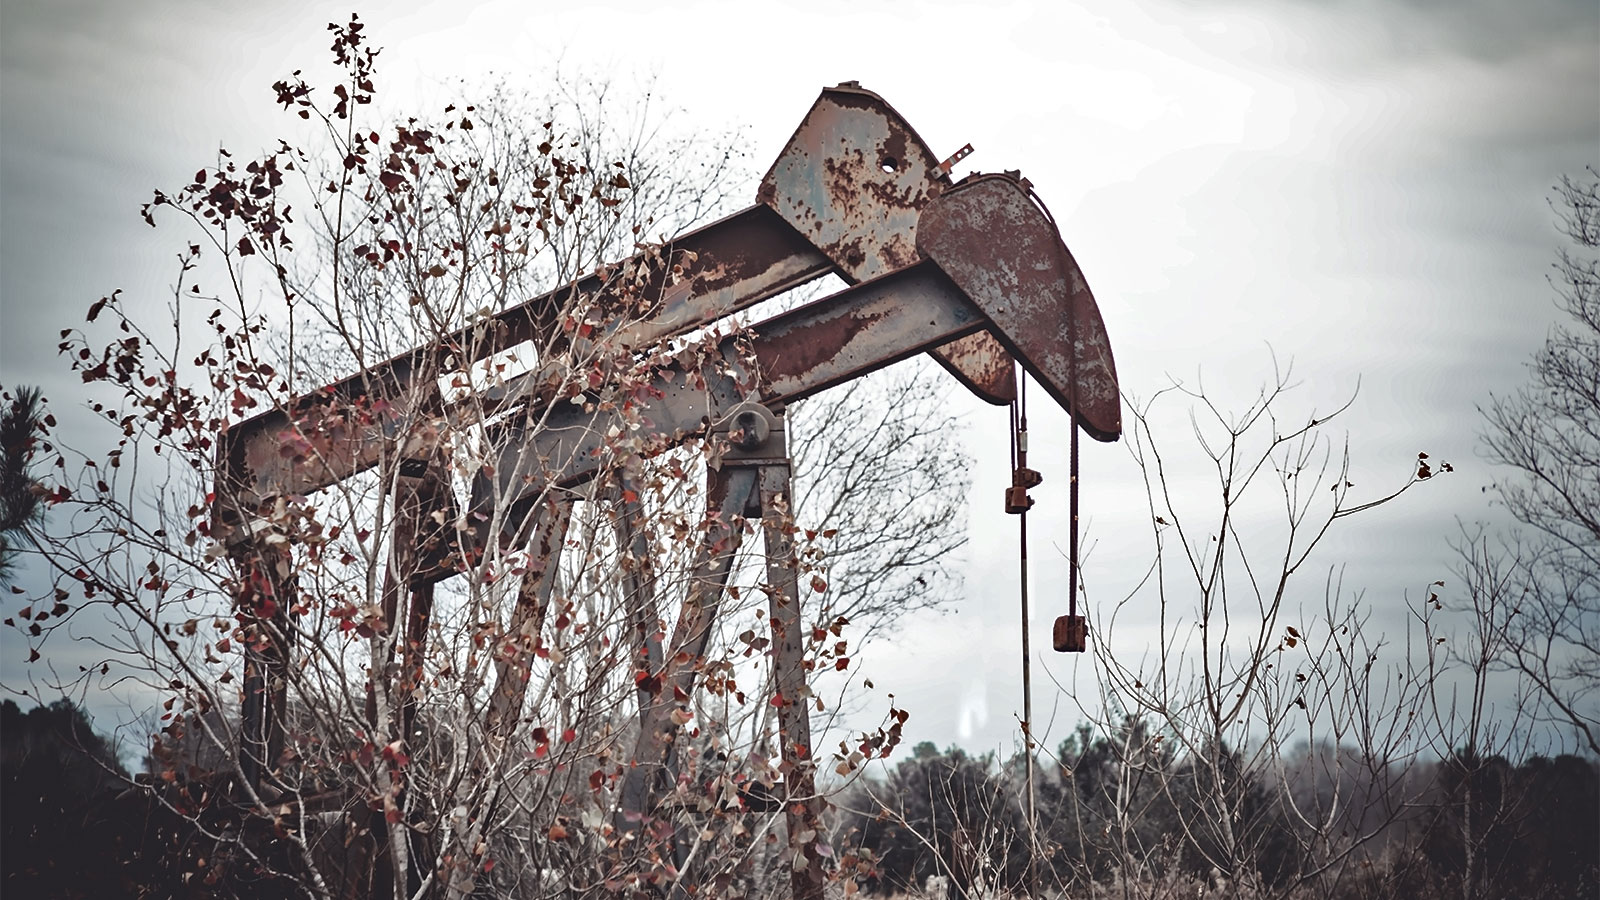 A photograph of rusty abandoned oil pumps in rural Texas.